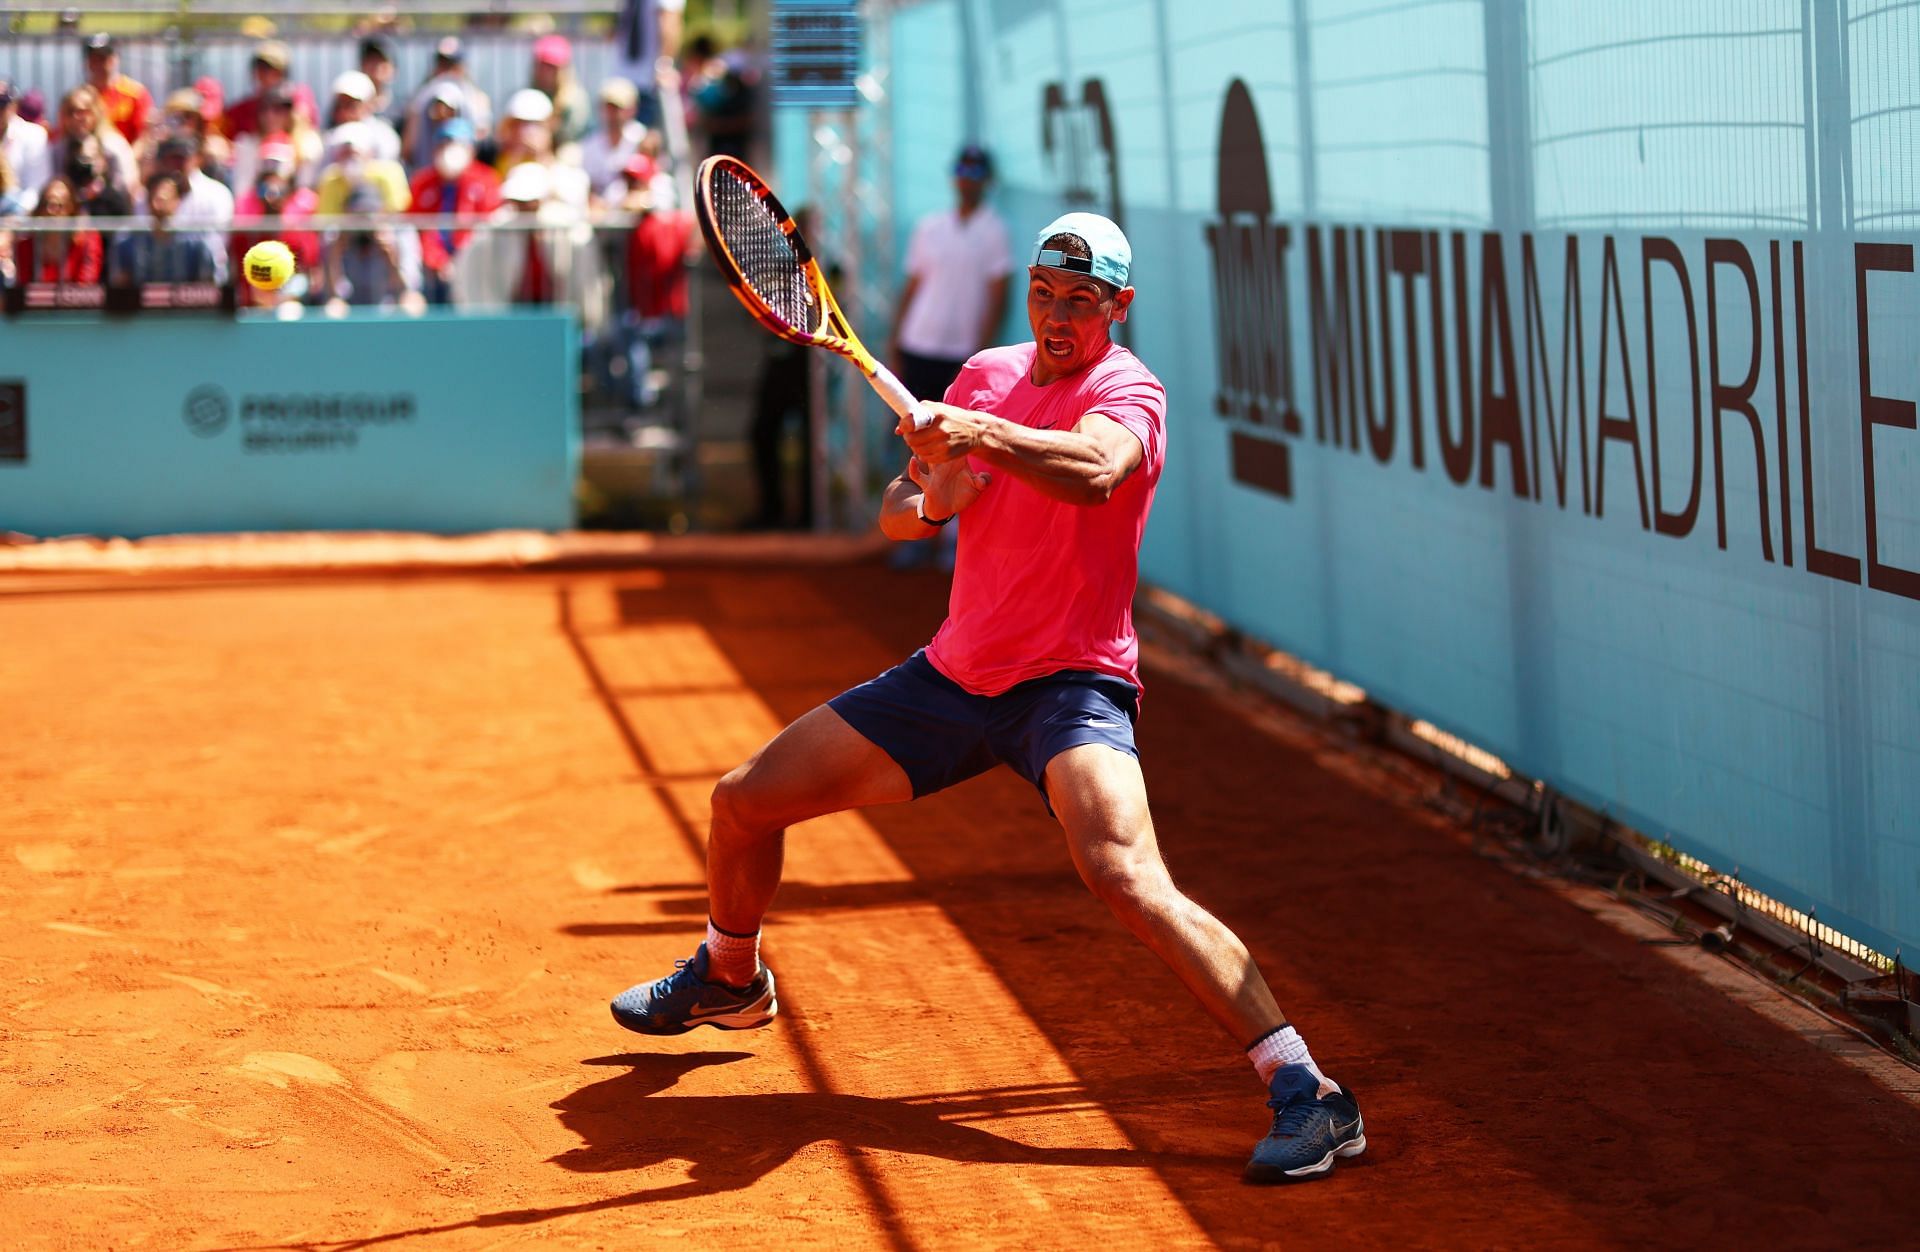 Rafael Nadal plays a forehand during a practice session on day four of the Mutua Madrid Open